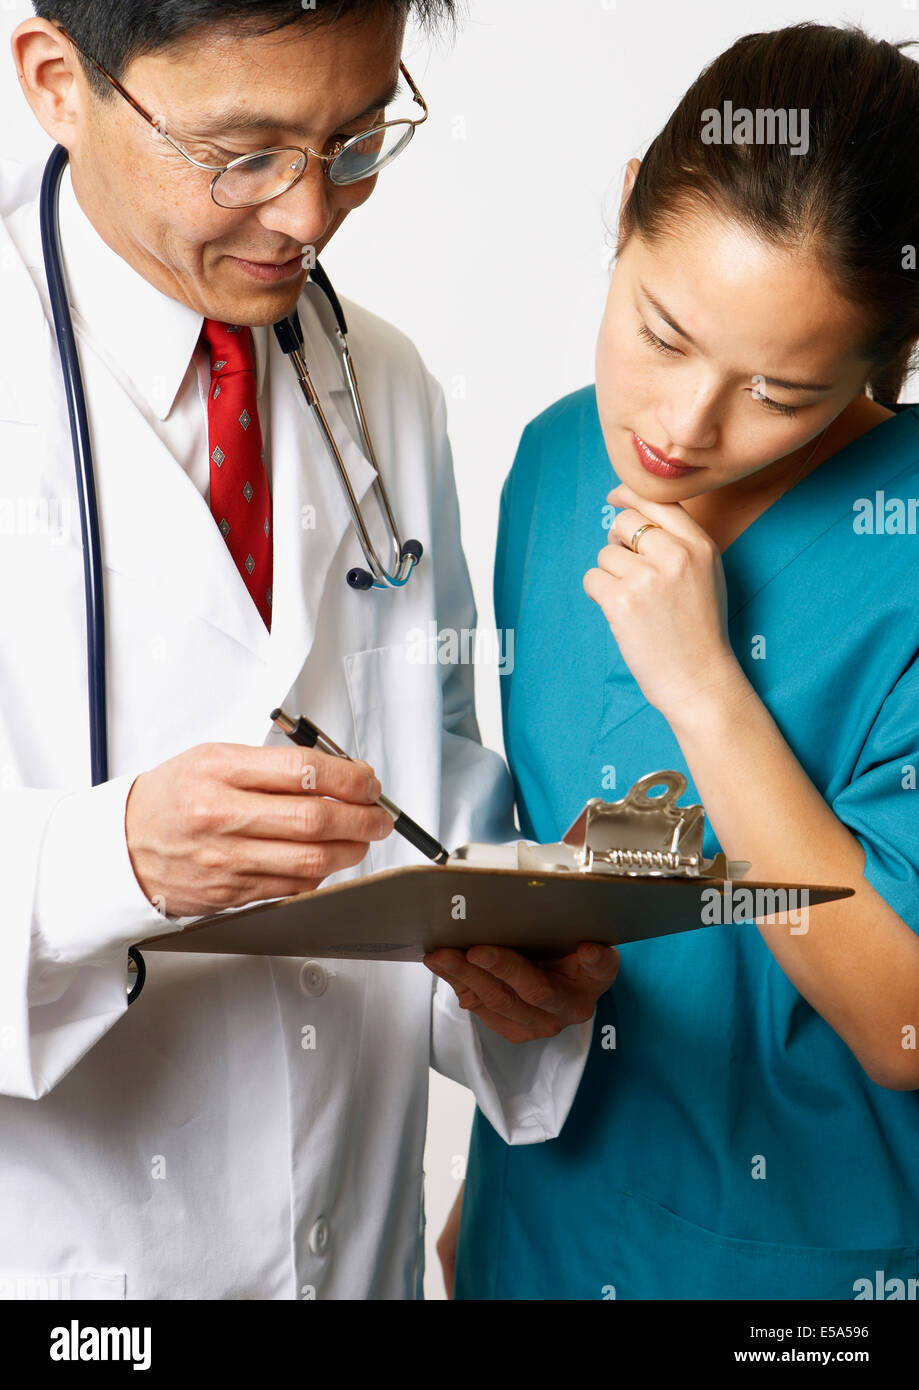 Doctor and nurse reading medical charts together Stock Photo